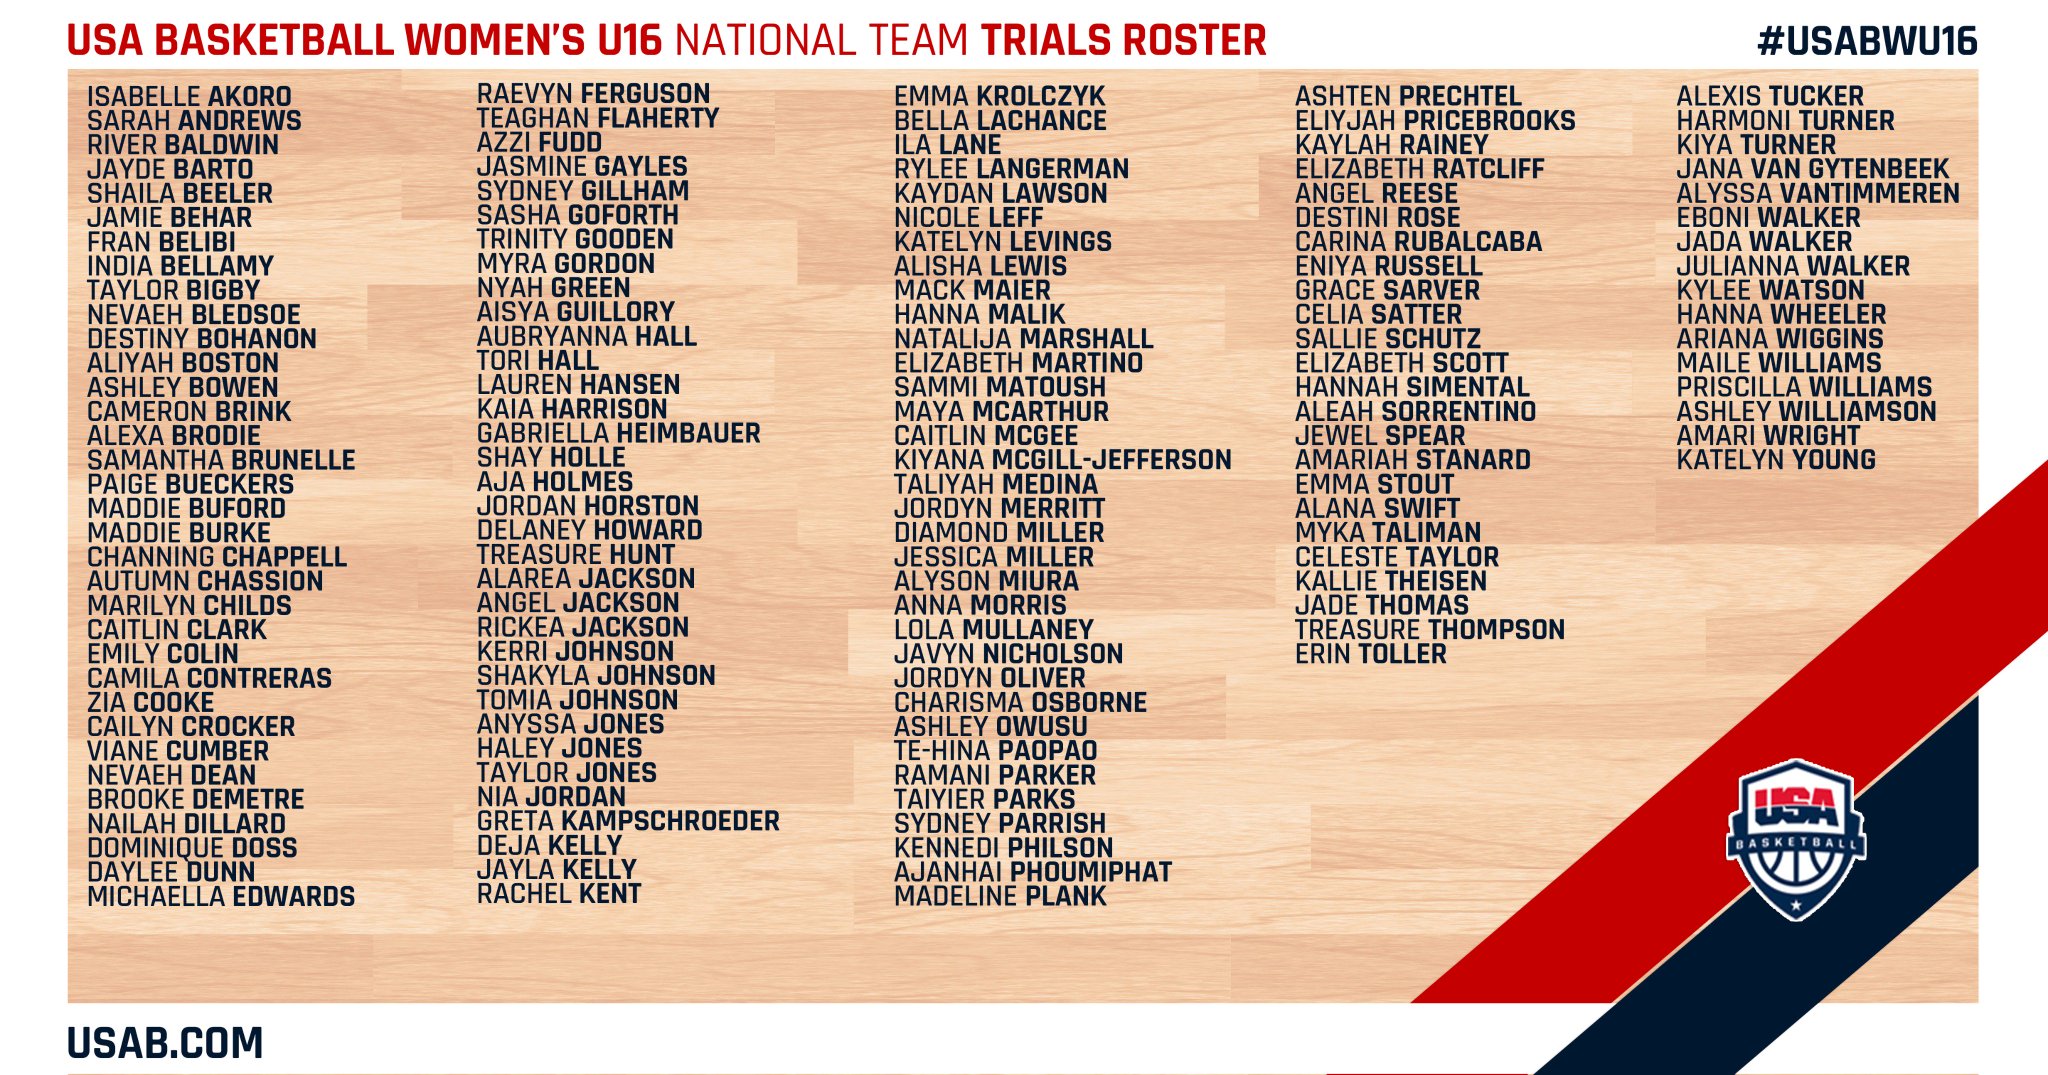 Usa Basketball Usa Women S U16 Trials Expected To Feature 142 Athletes From 33 States Usabwu16 Roster Details T Co Rzhscew6mv T Co Wu9si8xqrx